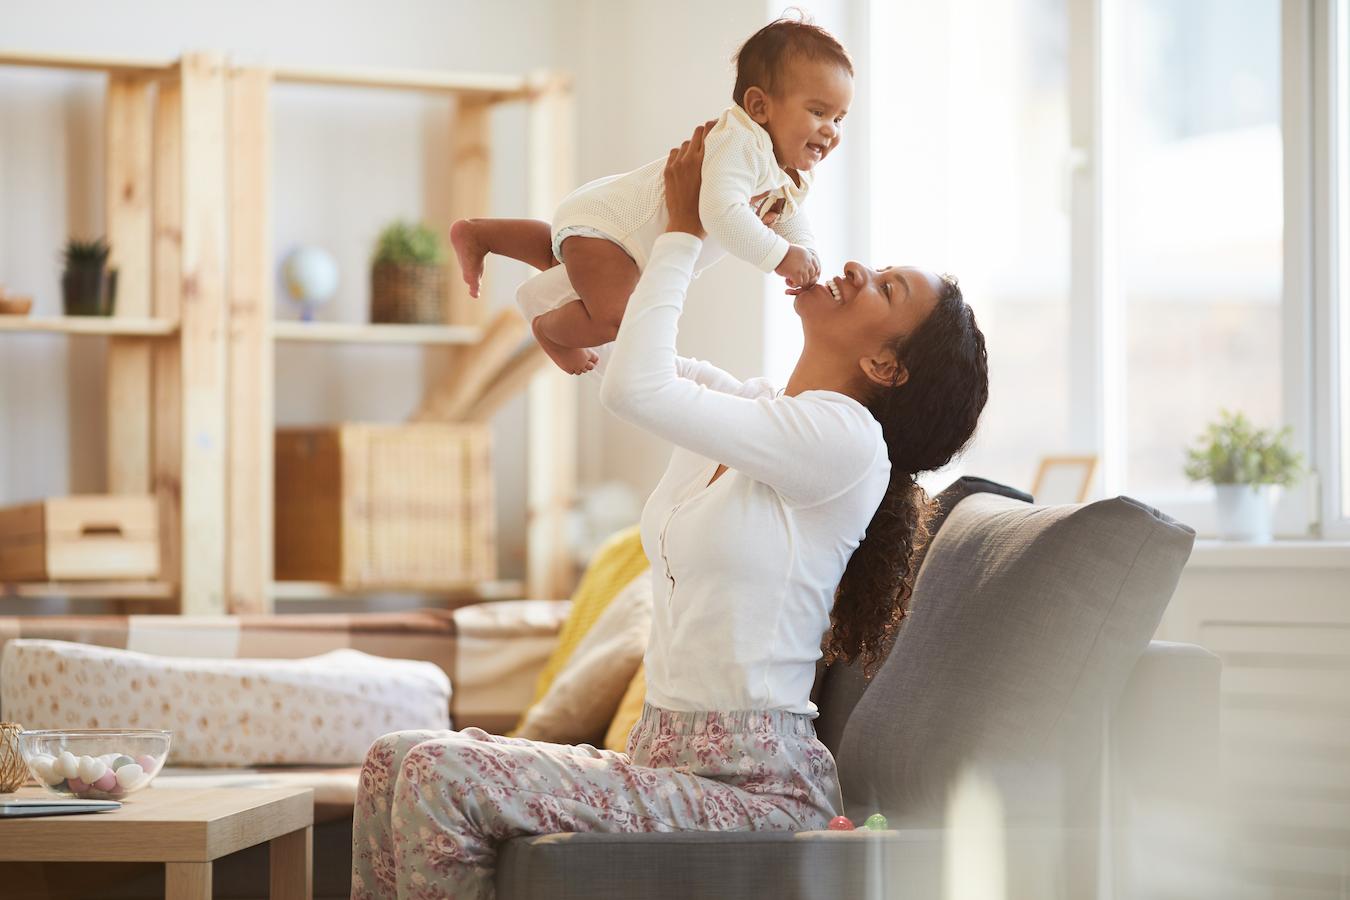 Maternity Leave: How much time off is healthiest for babies and mothers?